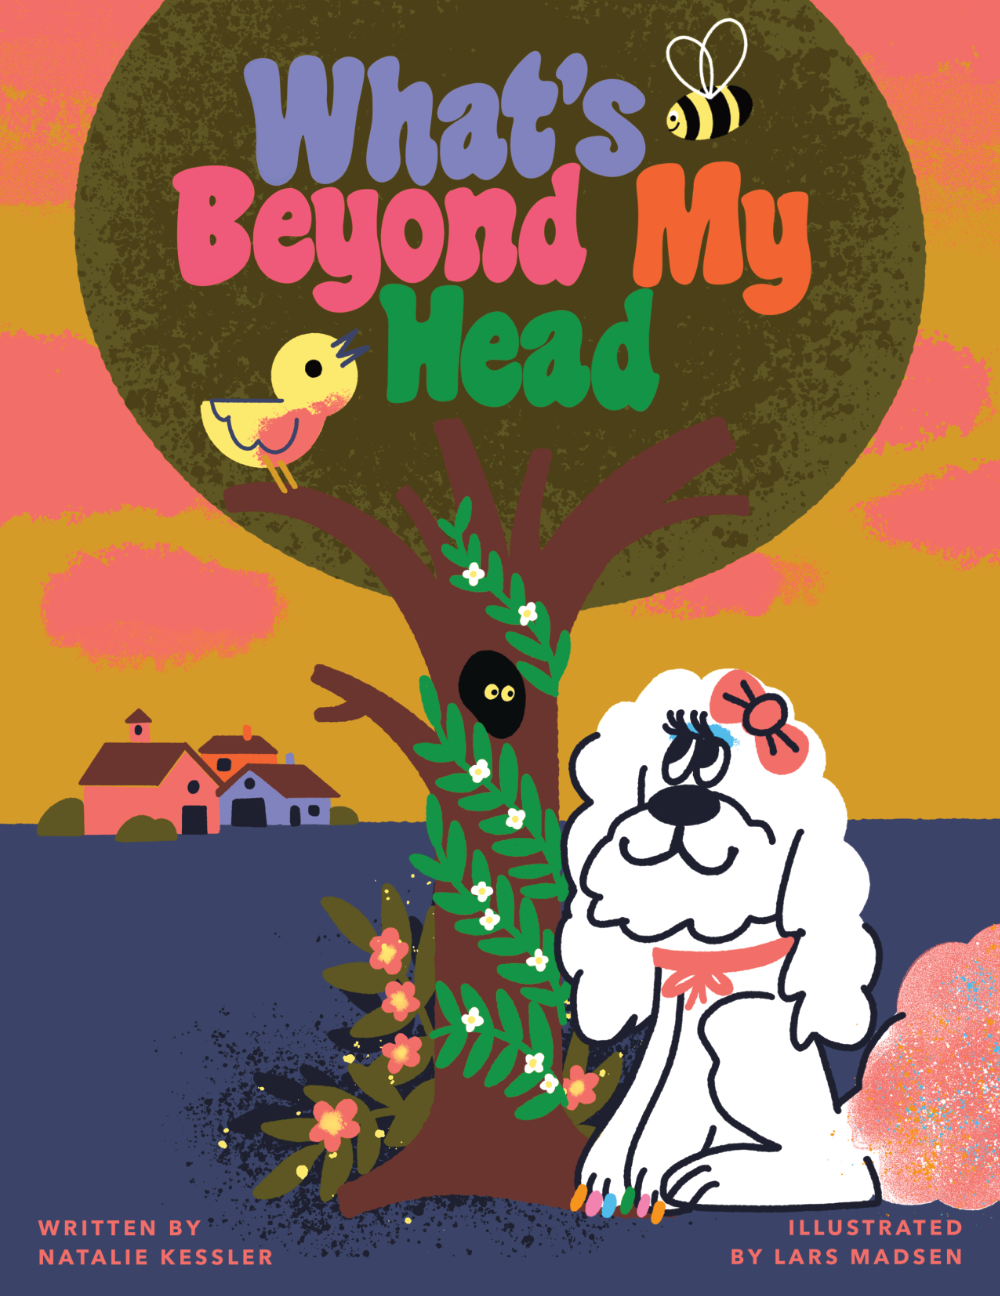 whats-beyond-may-head-childrens-book-cover-lars-madsen-illustration.png